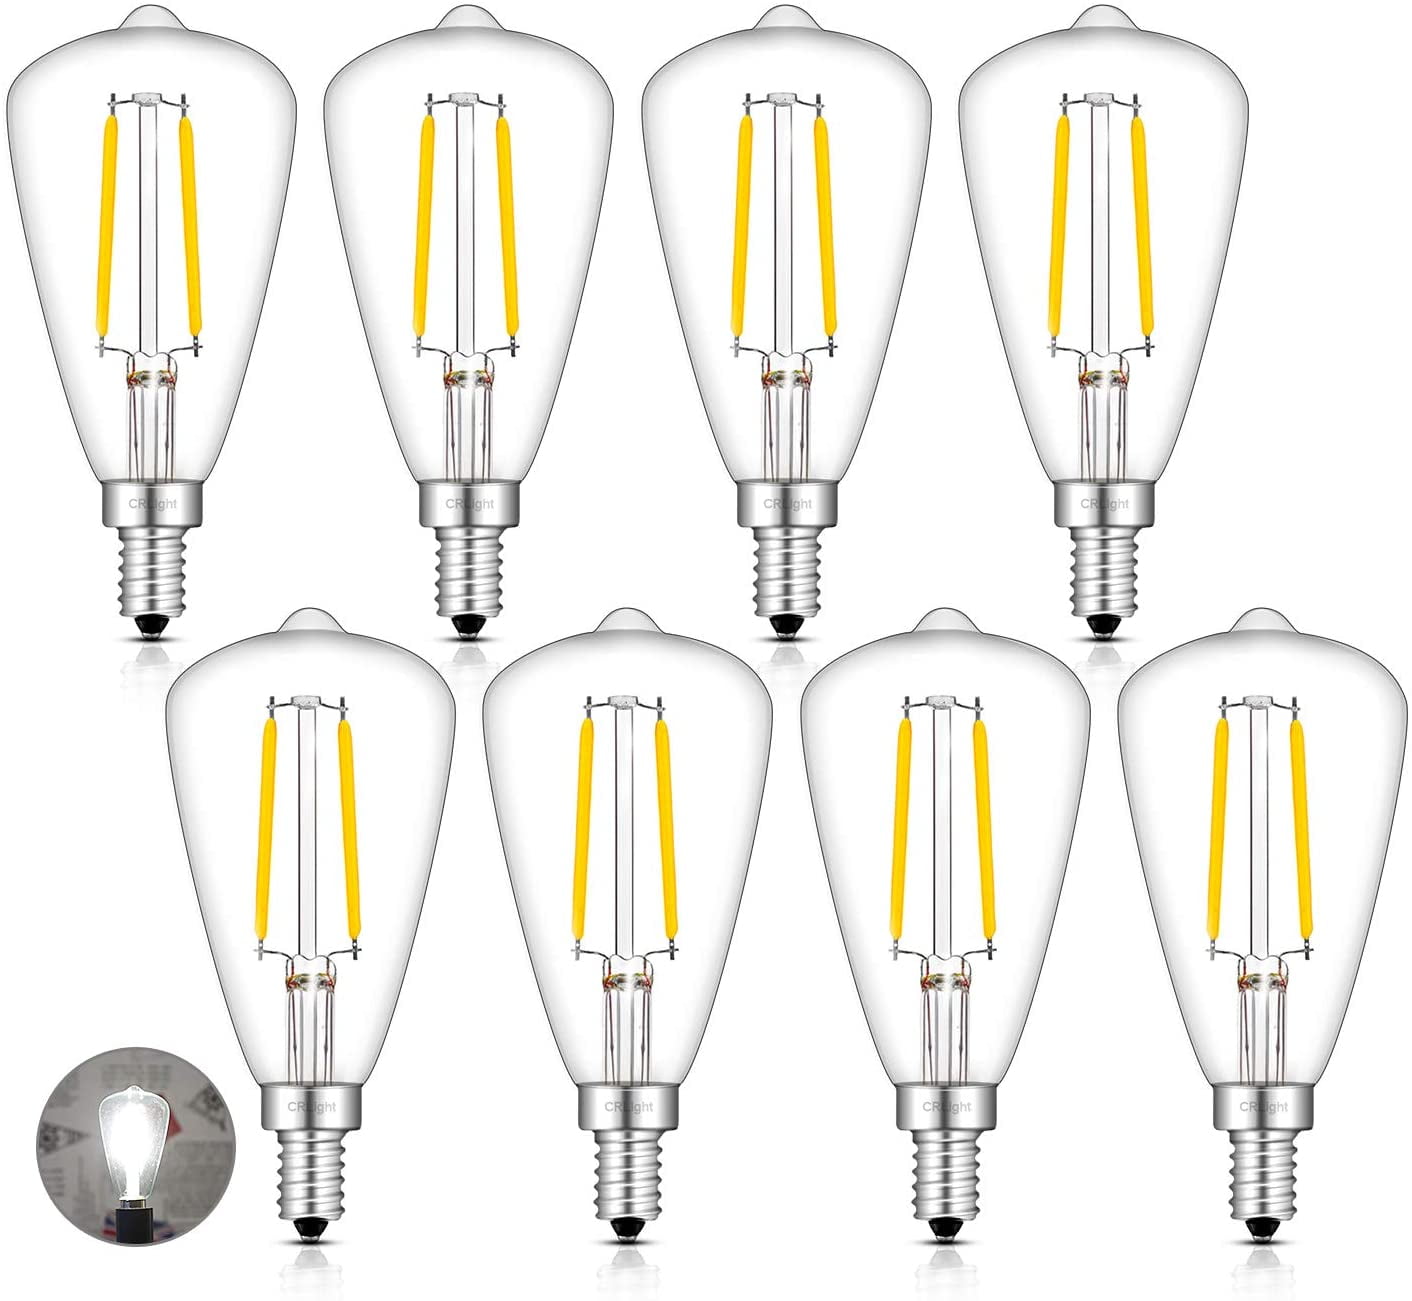 G45/G14 Amber Glass Globe Cover Pack of 6 Dimmable E12 Candelabra Base Antique Gold Tint Panledo 4W Vintage Edison LED Filament Light Bulb 2200K Ultra Warm White 40W Incandescent Replacement